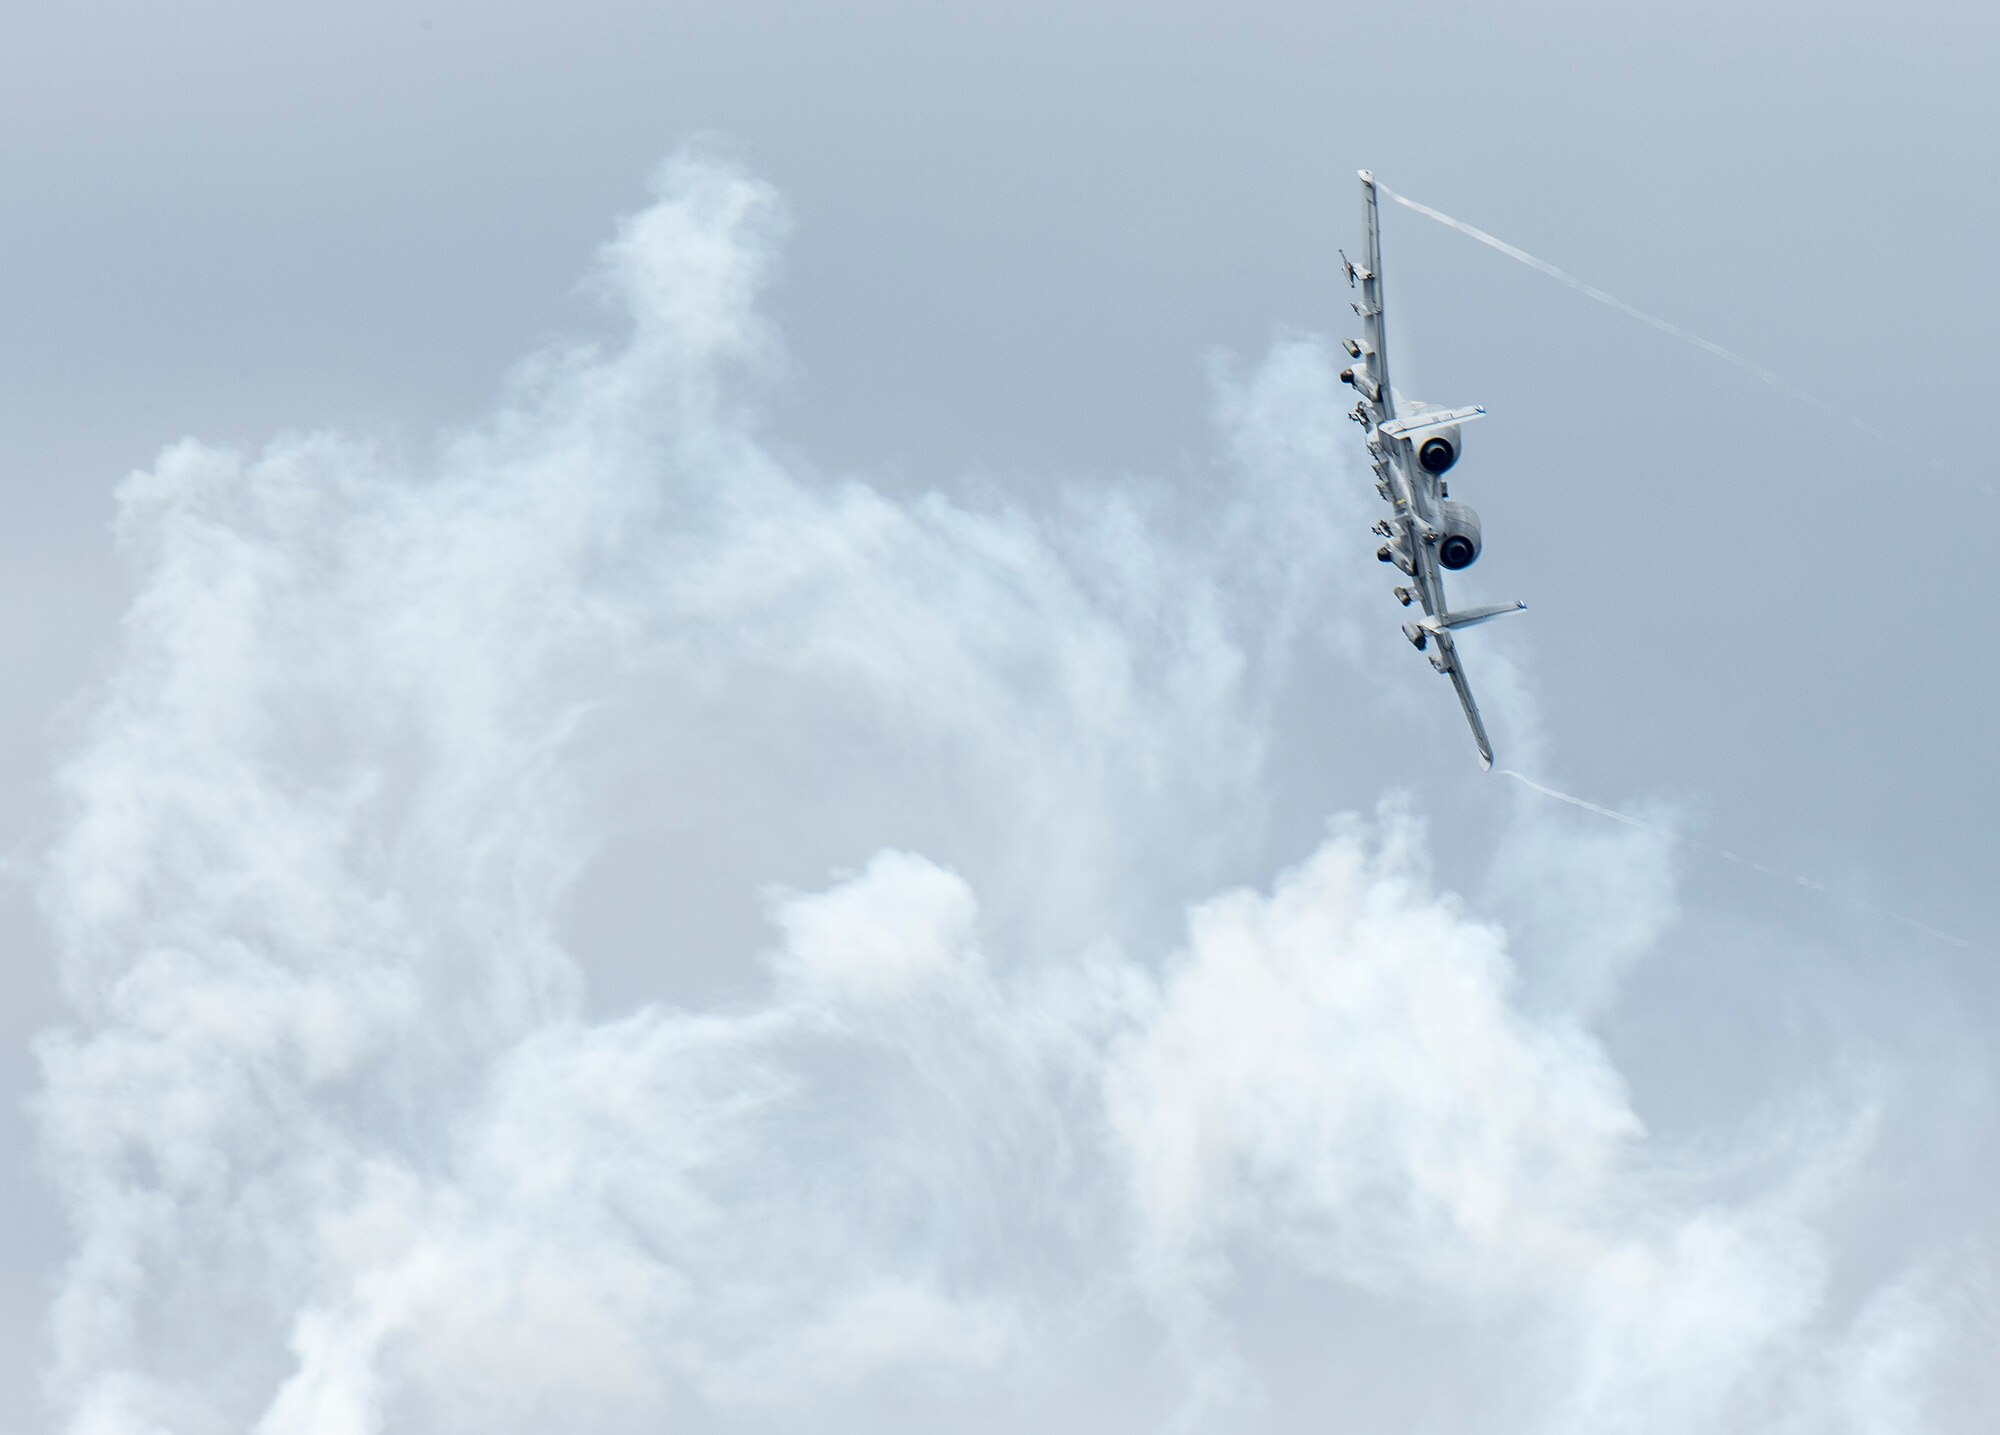 An A-10 Thunderbolt II banks through flare smoke over Grand Bay Bombing and Gunnery Range at Moody Air Force Base, Ga., Feb. 18, 2016. Multiple U.S. Air Force aircraft within Air Combat Command conducted joint aerial training that showcased the aircrafts tactical air and ground maneuvers, as well as its weapons capabilities. (U.S. Air Force photo by Staff Sgt. Brian J. Valencia/Released)